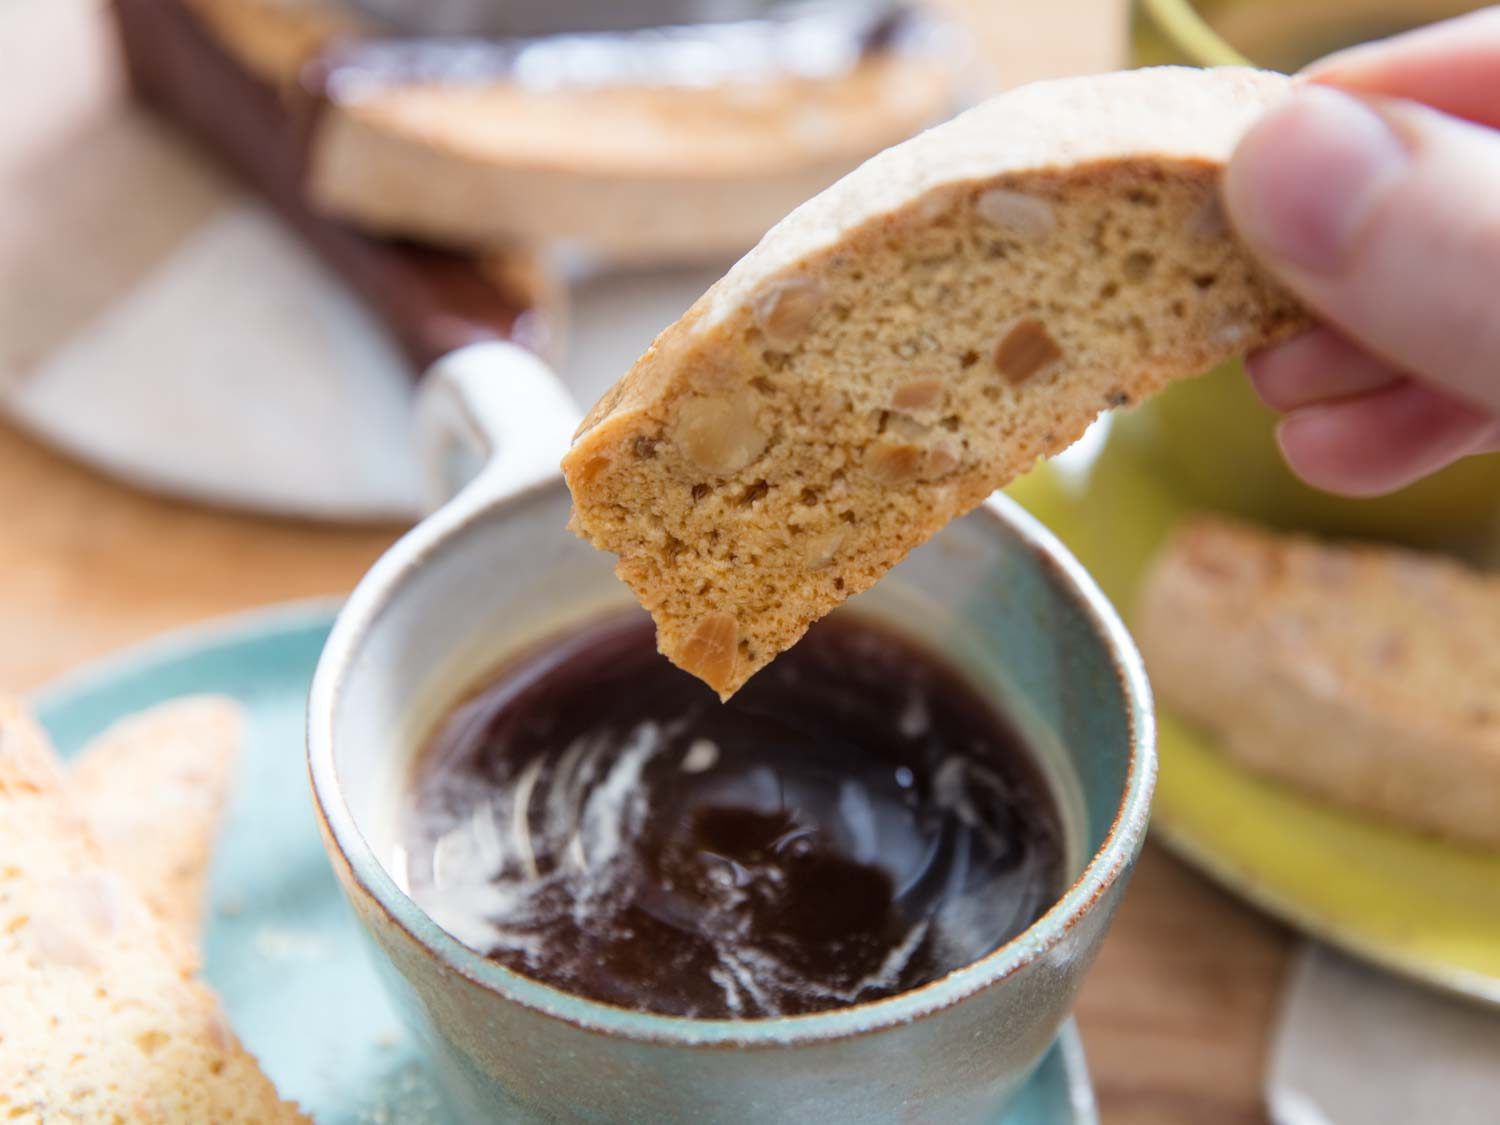 Dunking a biscotti in coffee.